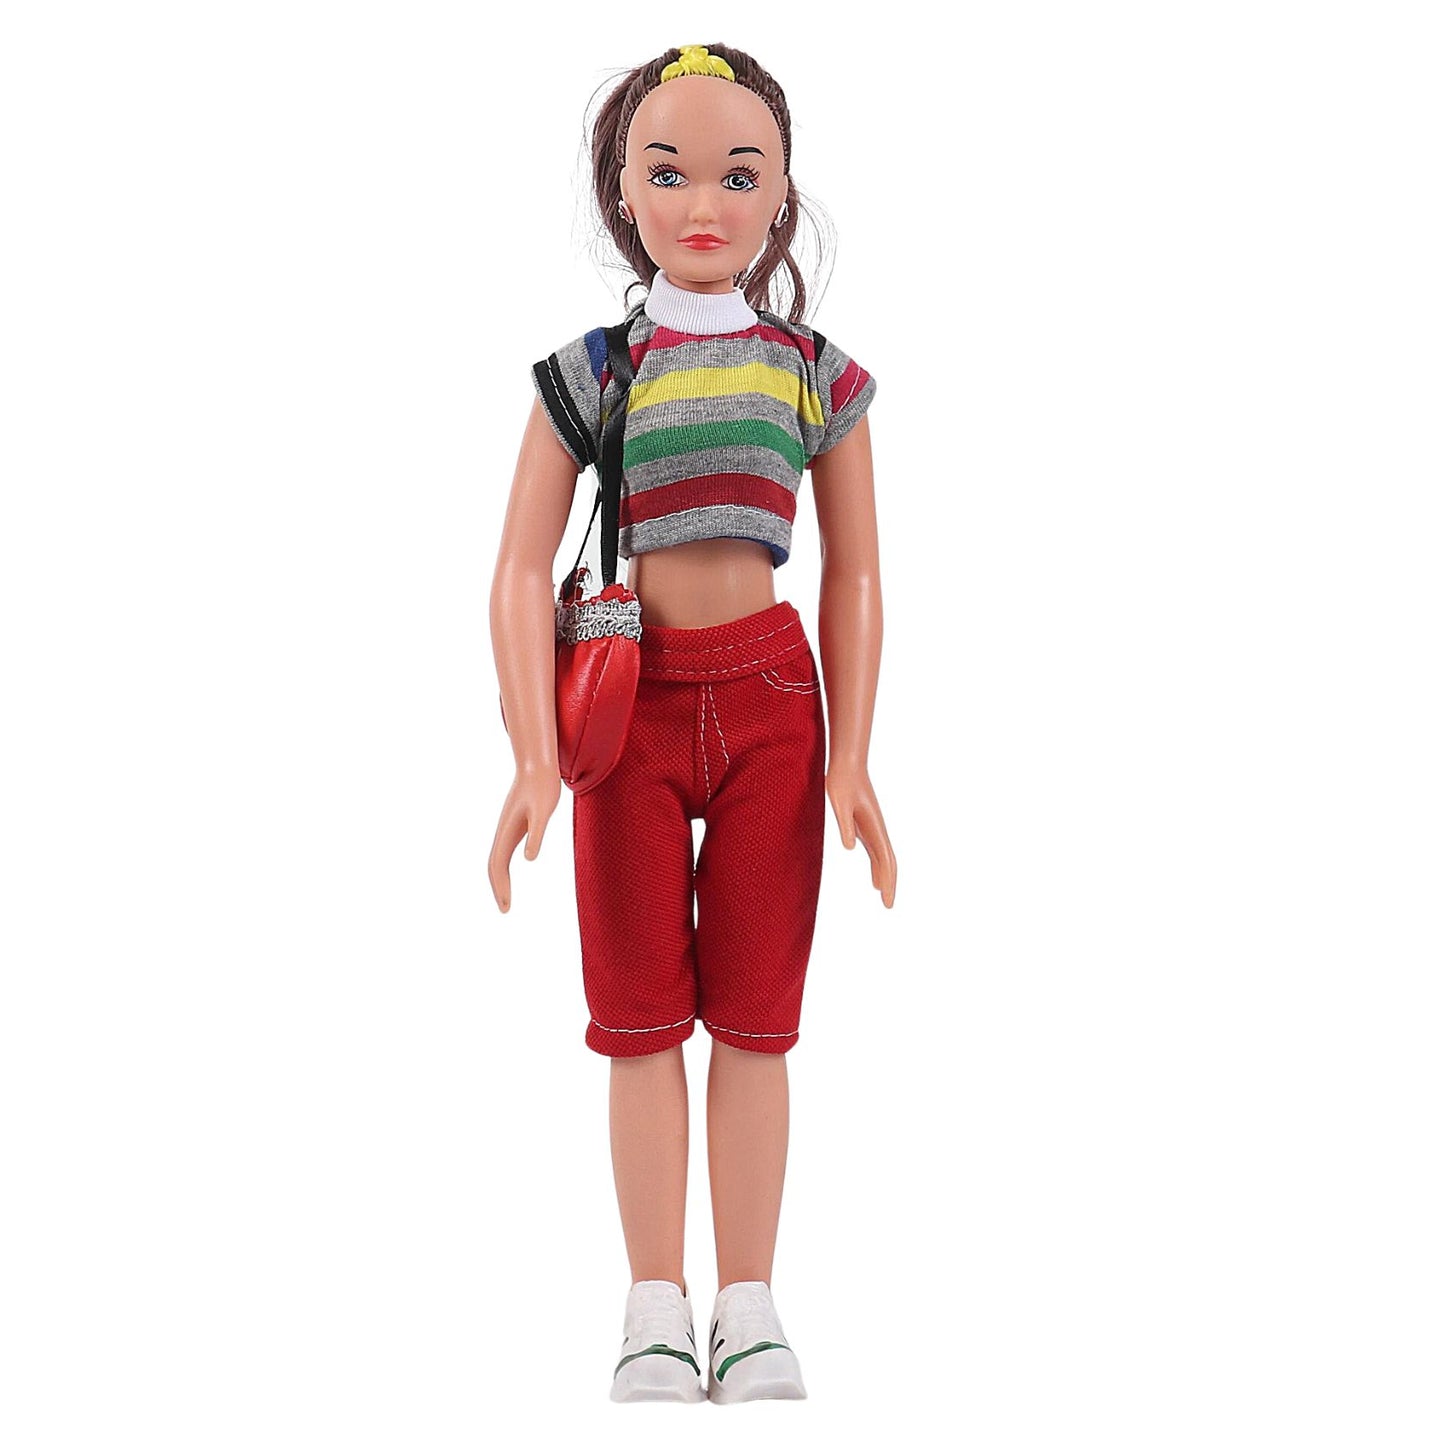 Speedage Katria Fashion Doll for 3 to 10 Year Girls - Non-Toxic, BIS Certified, 40cm, Dress Color Varies